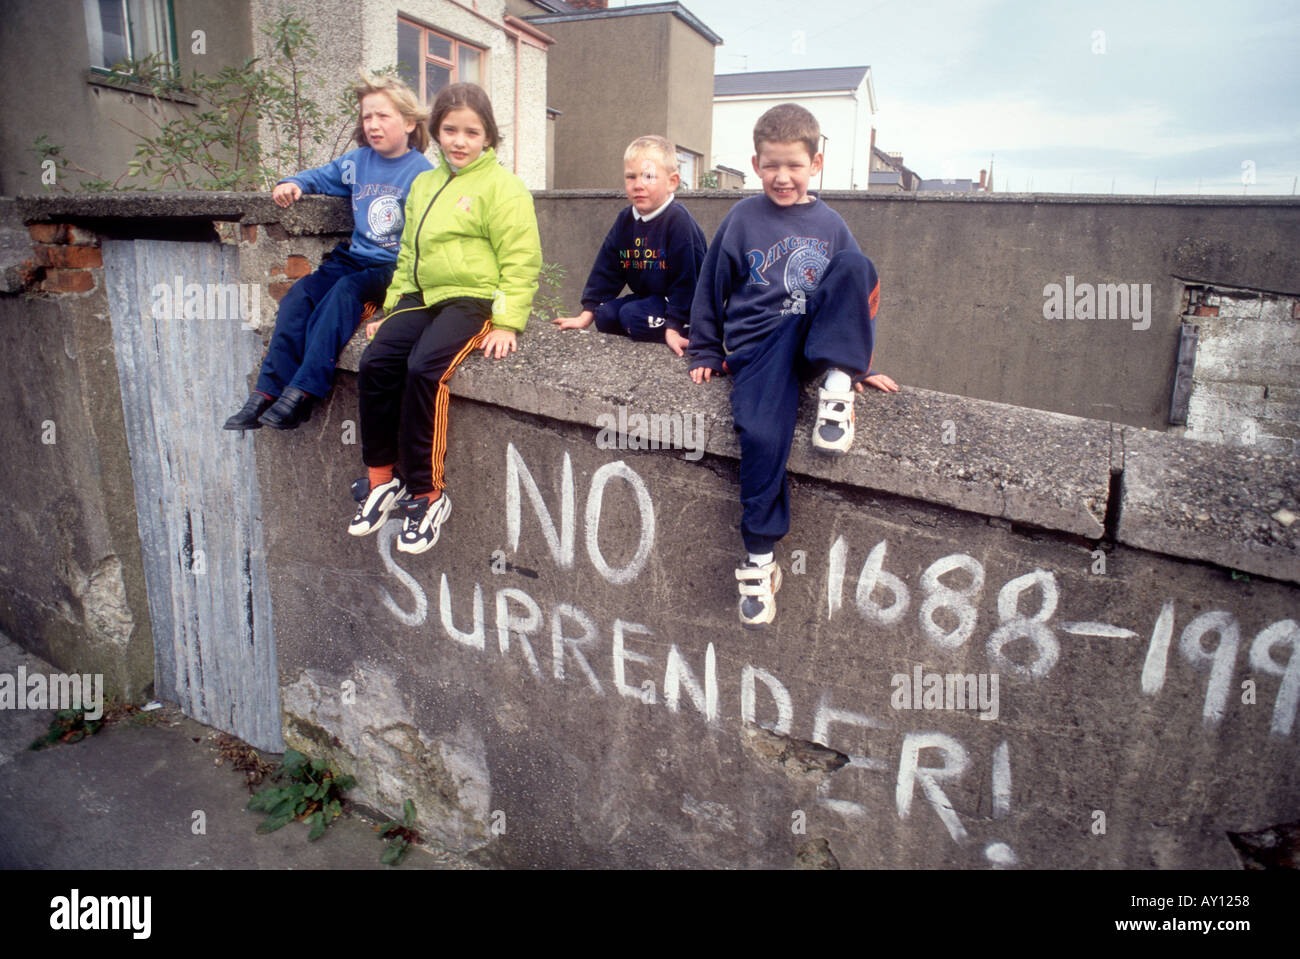 real local Children with IRA message in Derry, Northern Ireland Londonderry UK Killed with No Surrender painted sign on wall Stock Photo